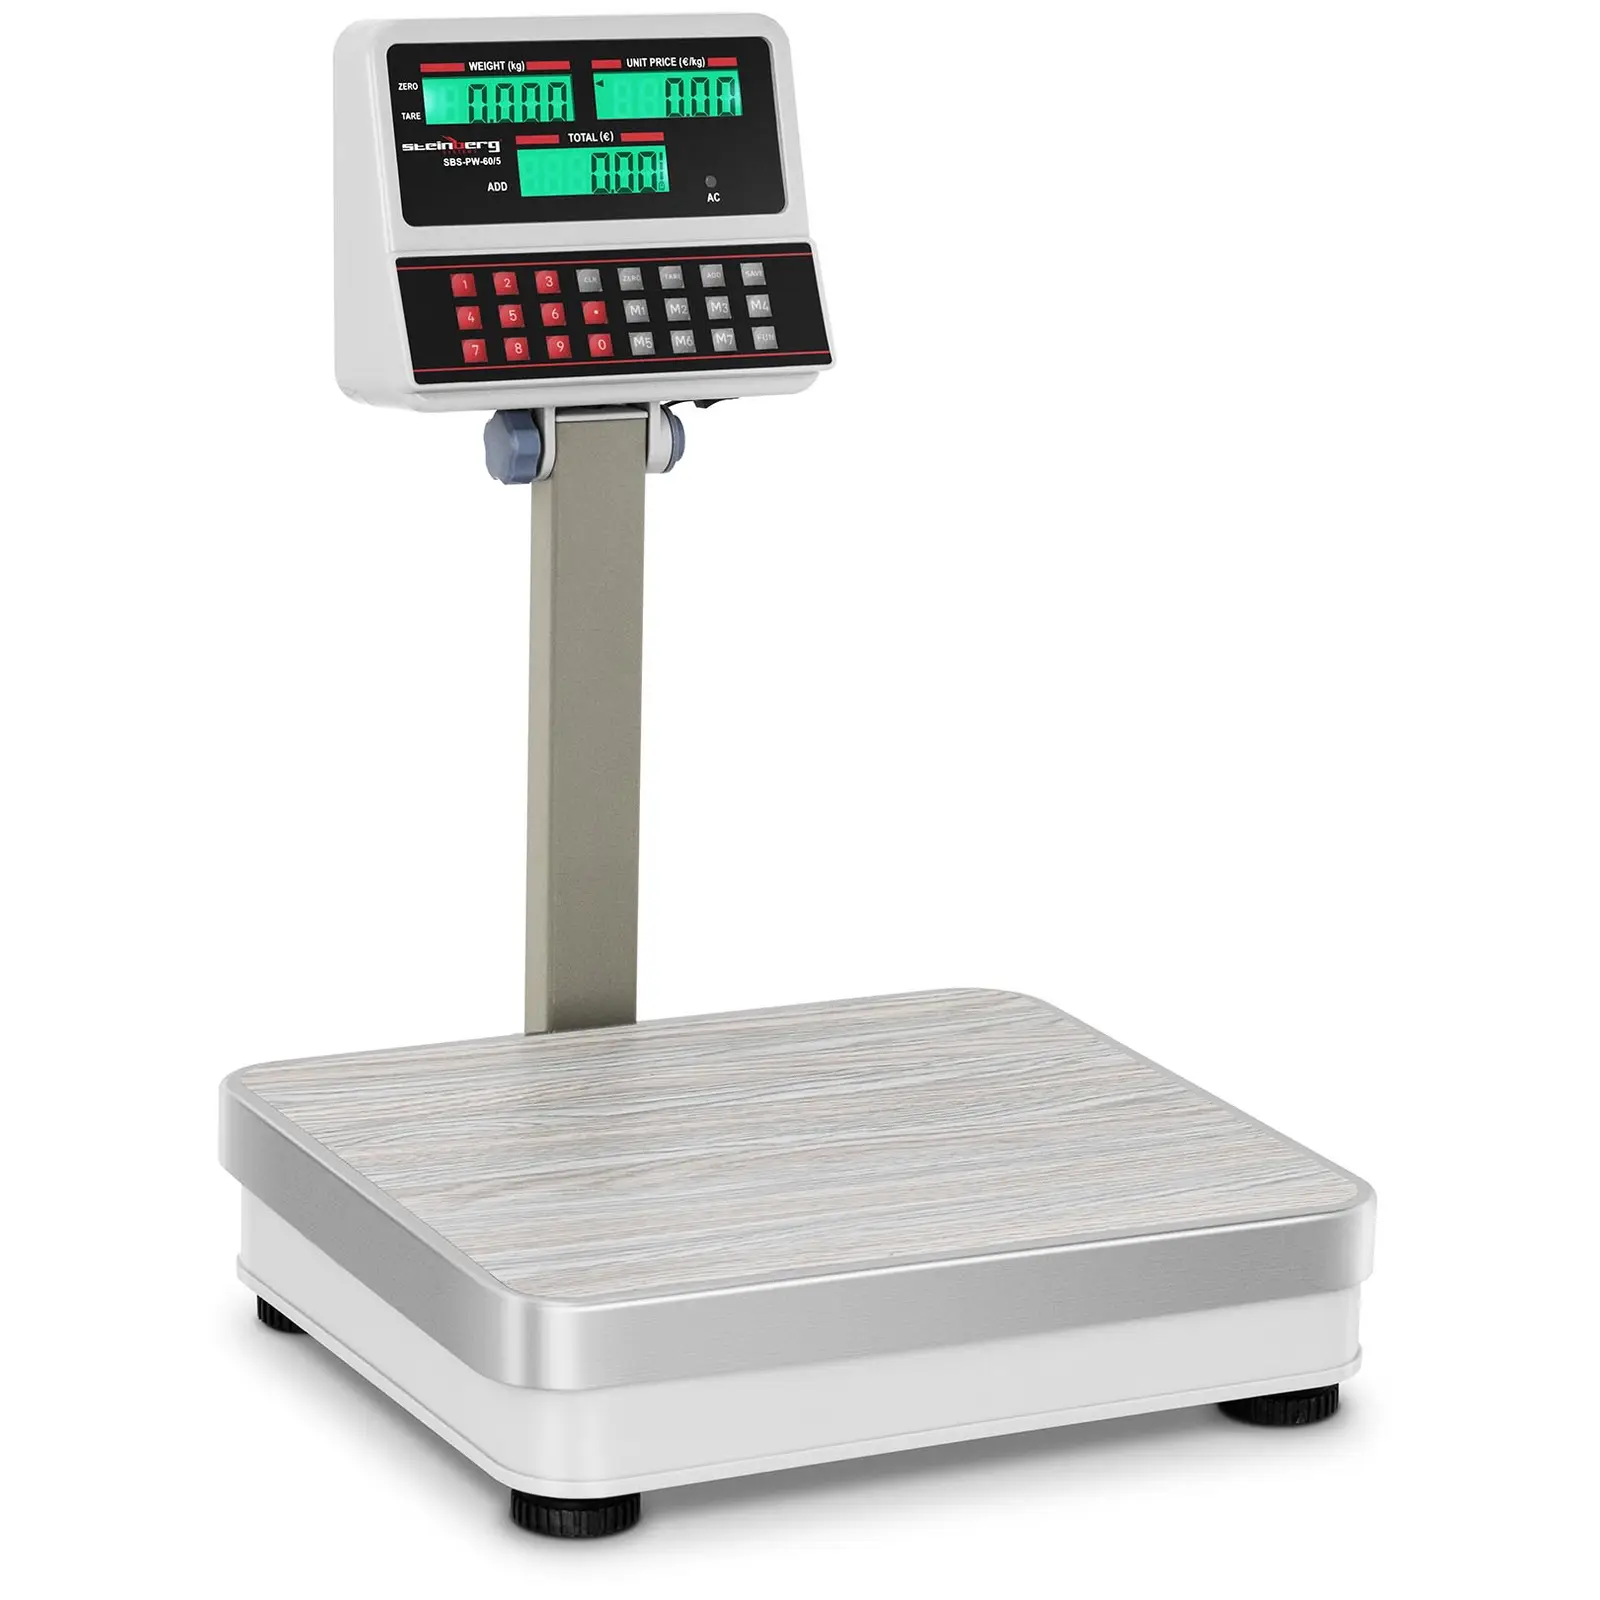 Digital Weighing Scale with Raised LCD Display - 100 kg / 10 g